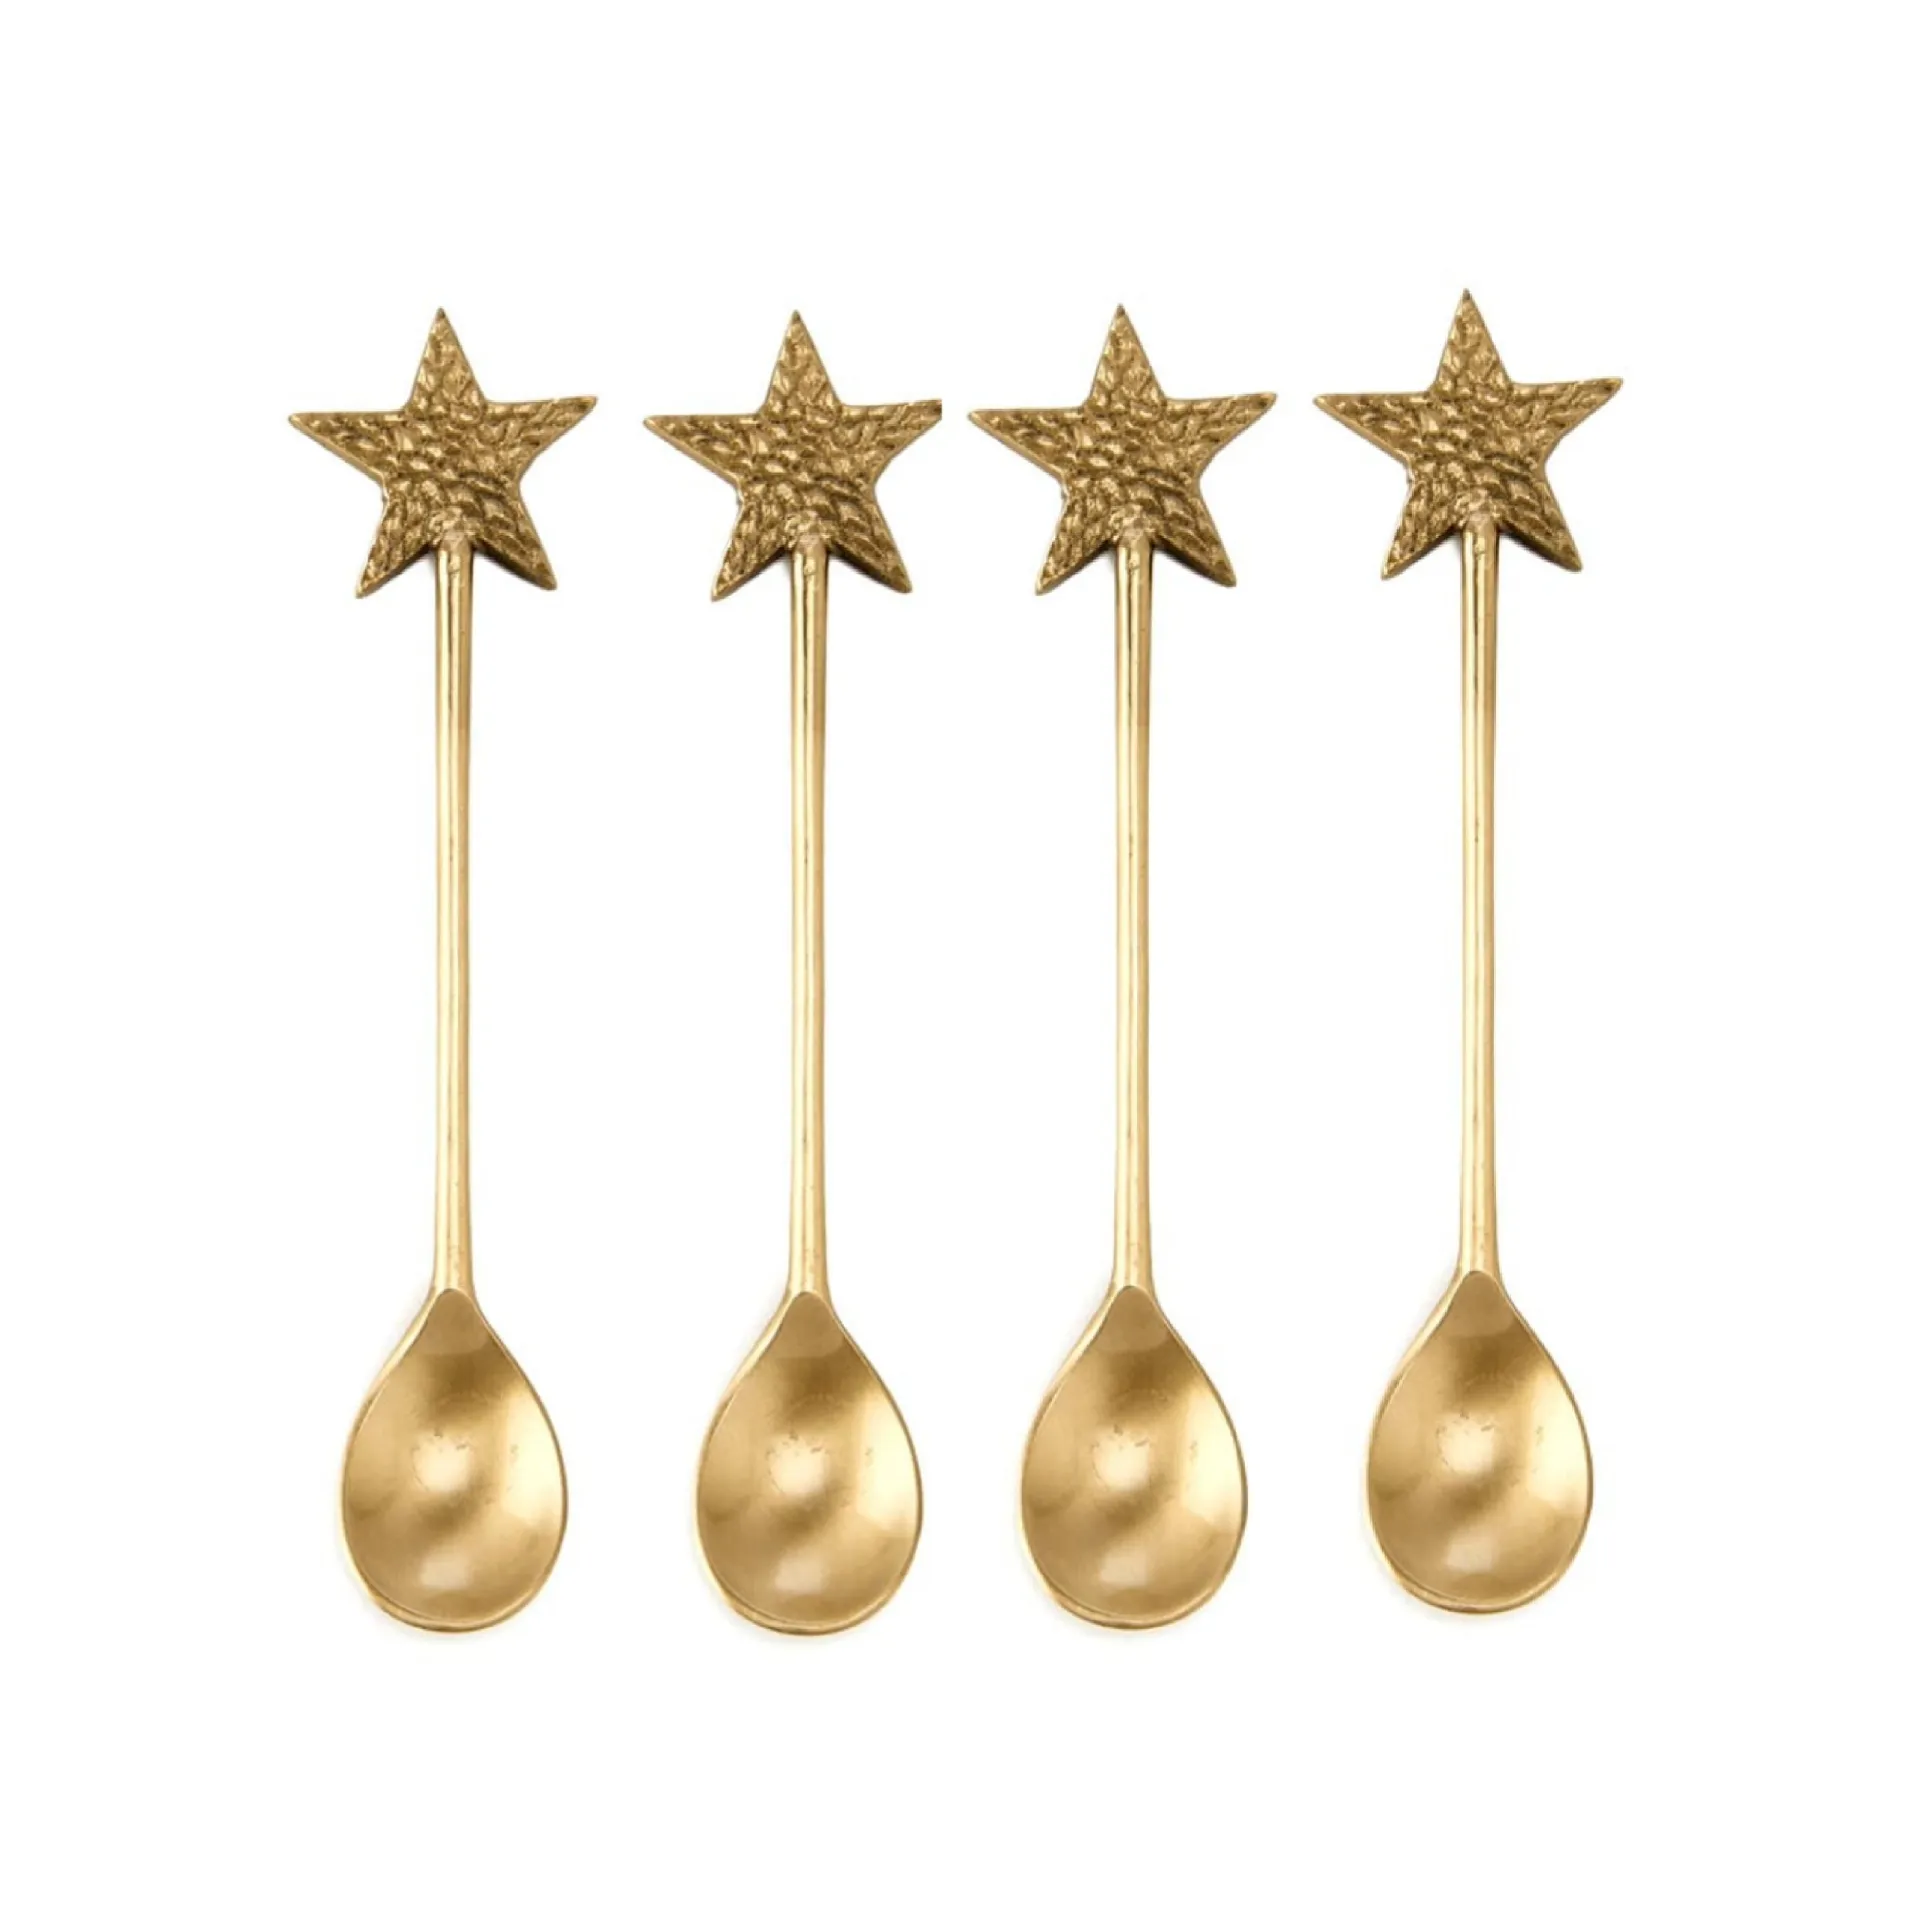 Brass Tea Spoon Set of 4 Piece For Home Hotel Restaurant Star Design Flatware Spoon With Matte Polish & Lacquer For Handicraft